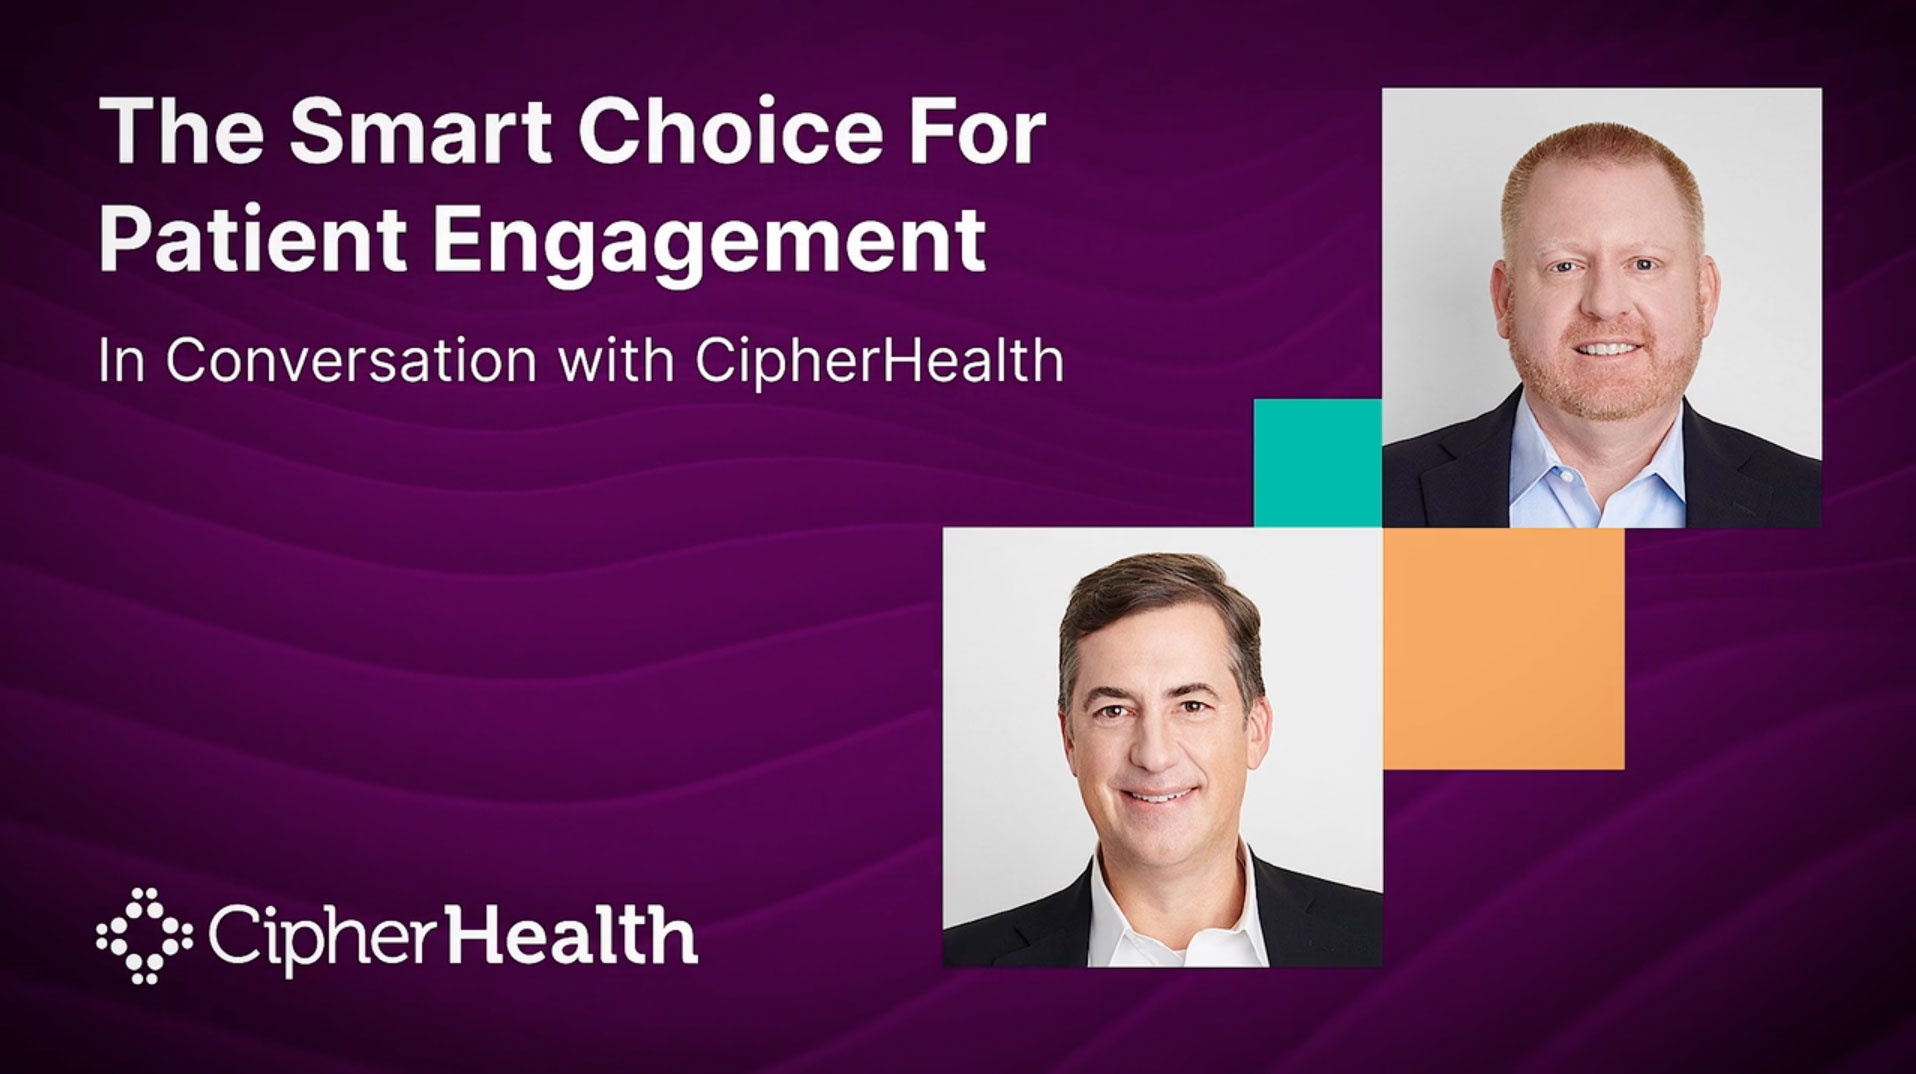 The Smart Choice for Patient Engagement